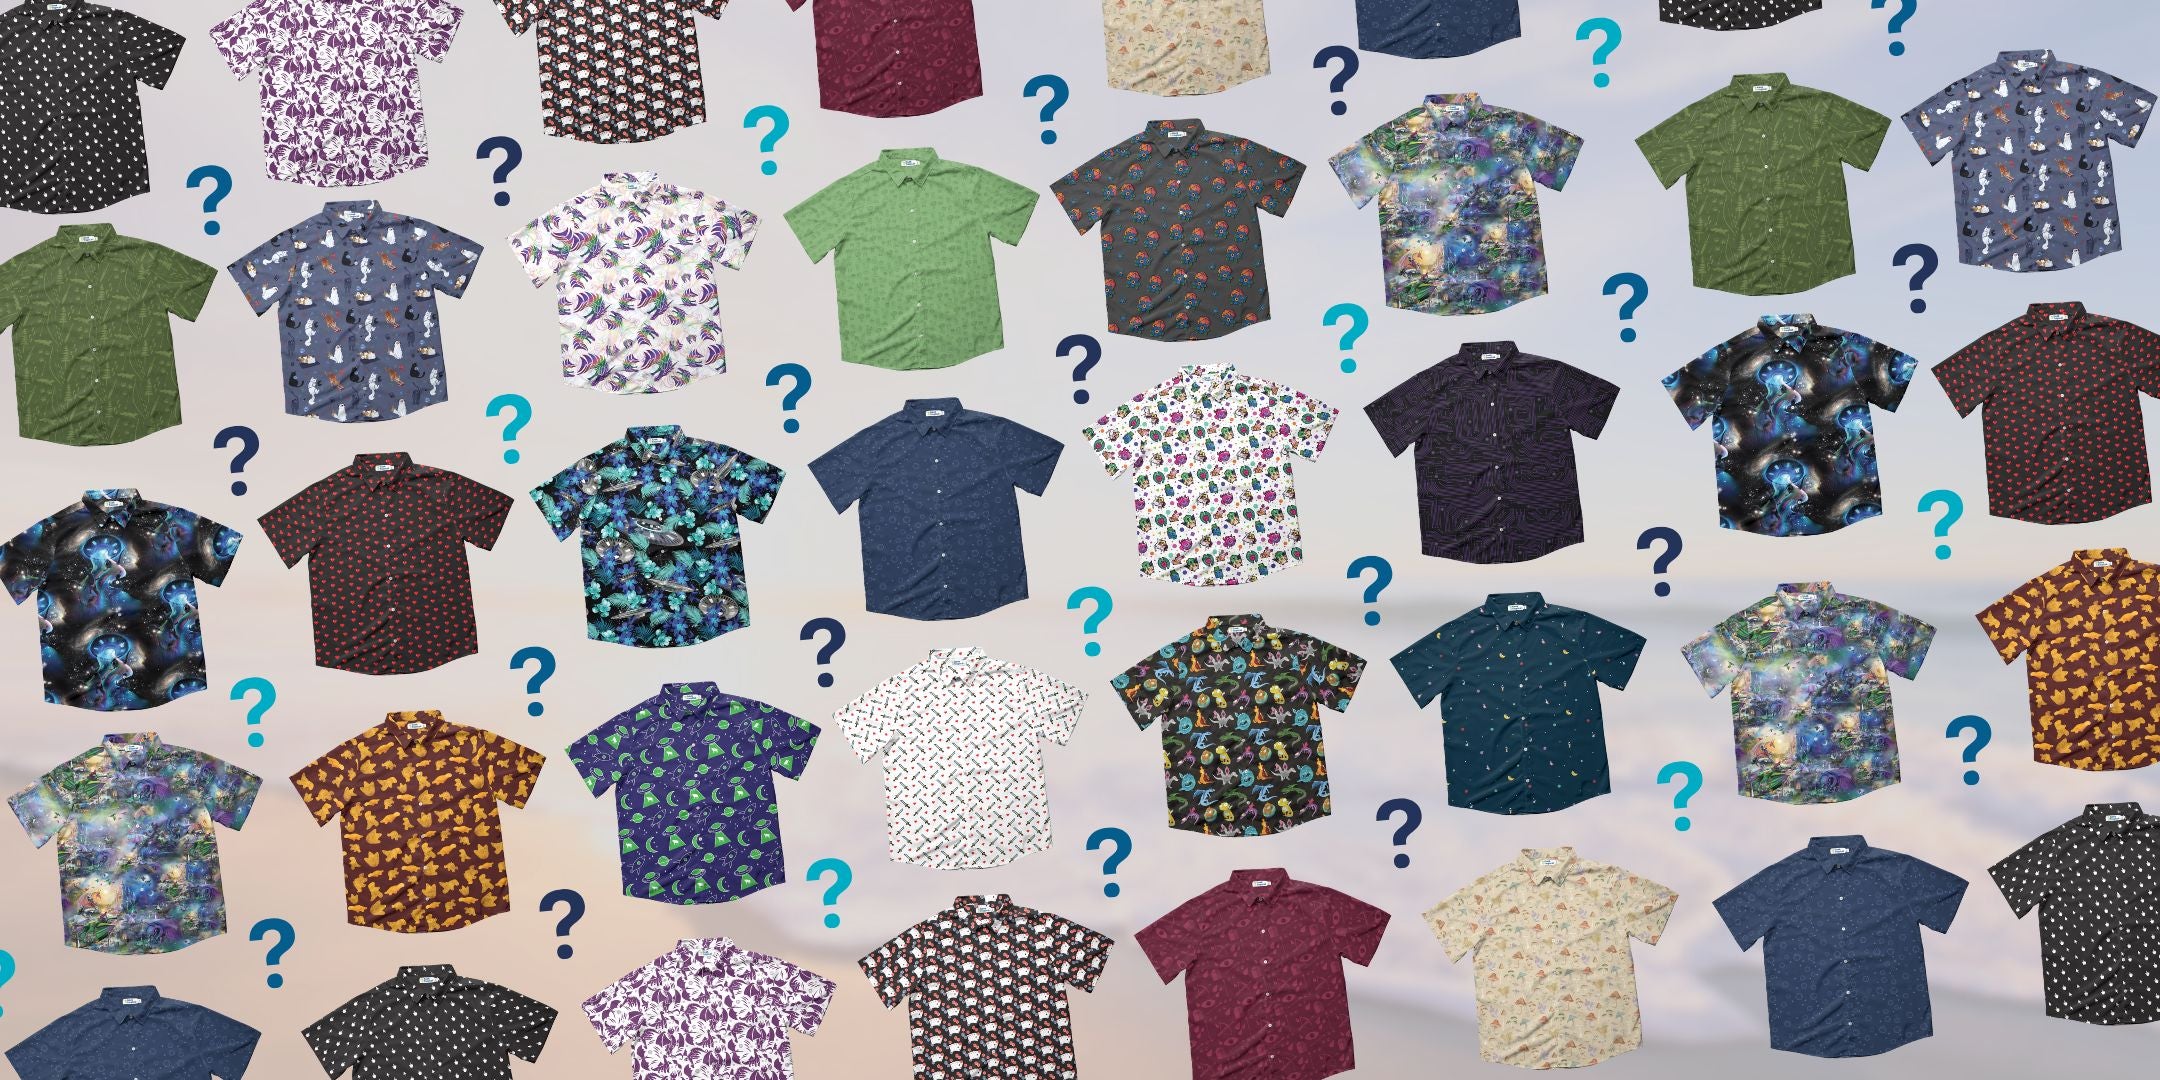 A wall of button up shirts with question marks between them, representing the difficulty of finding nerdy button up shirts. The shirts feature various geeky themes such as Fantasy, D&D, and dinosaurs, and come in cool patterns and unique designs.